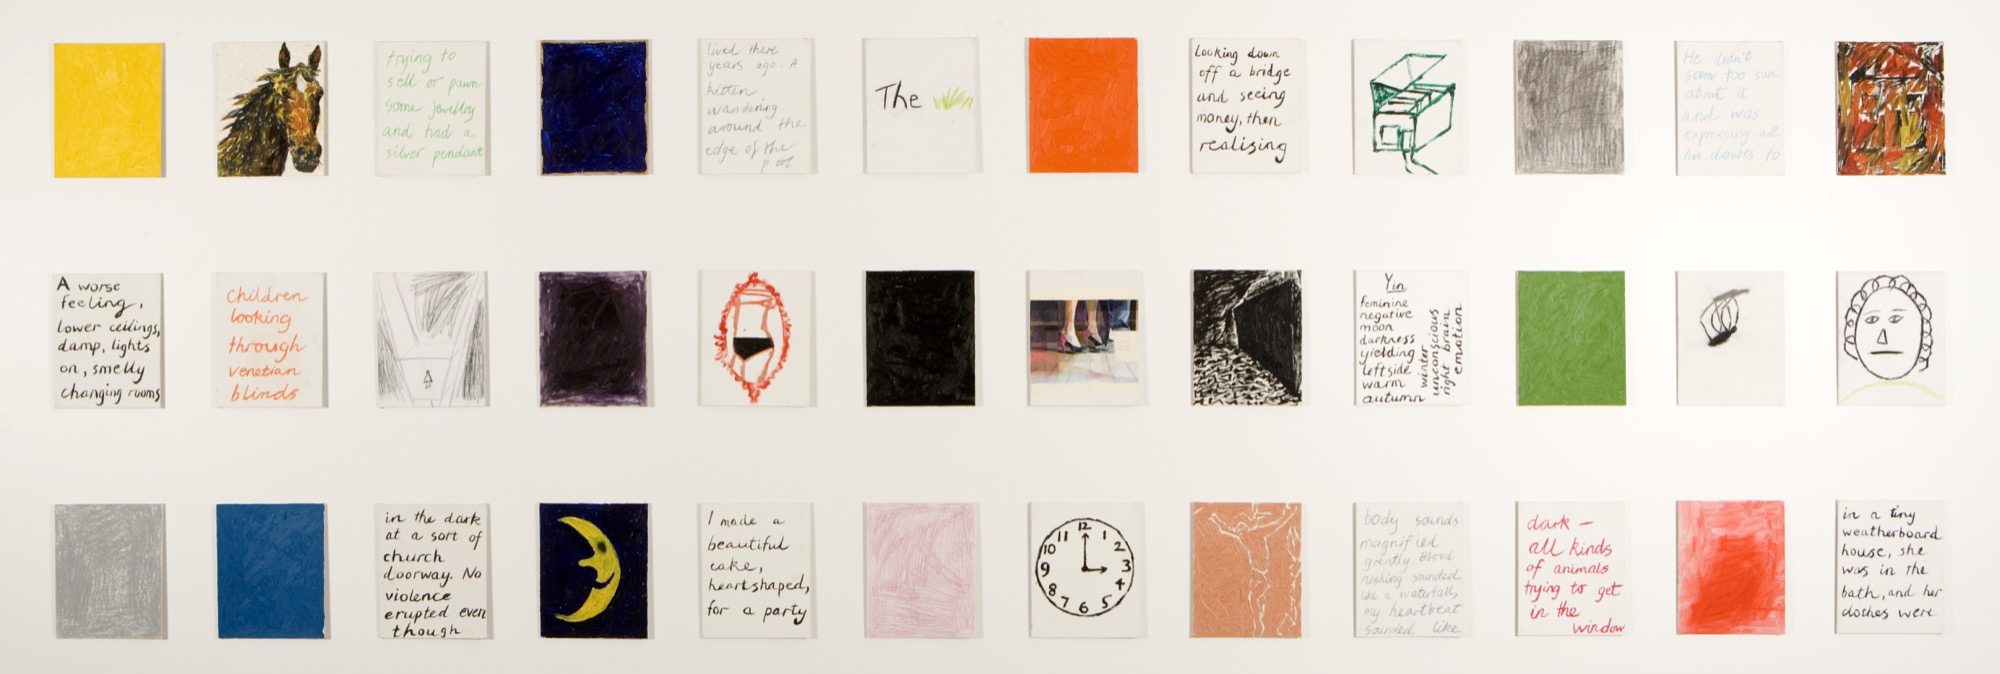 Jenny Watson, <em>Dream Palette</em>, 1981, oil, synthetic polymer paint, crayon, pastel, pencil, charcoal, JW Power Collection, University of Sydney, managed by Museum of Contemporary Art, purchased 1986. Image courtesy the artist and Museum of Contemporary Art Australia © the artist